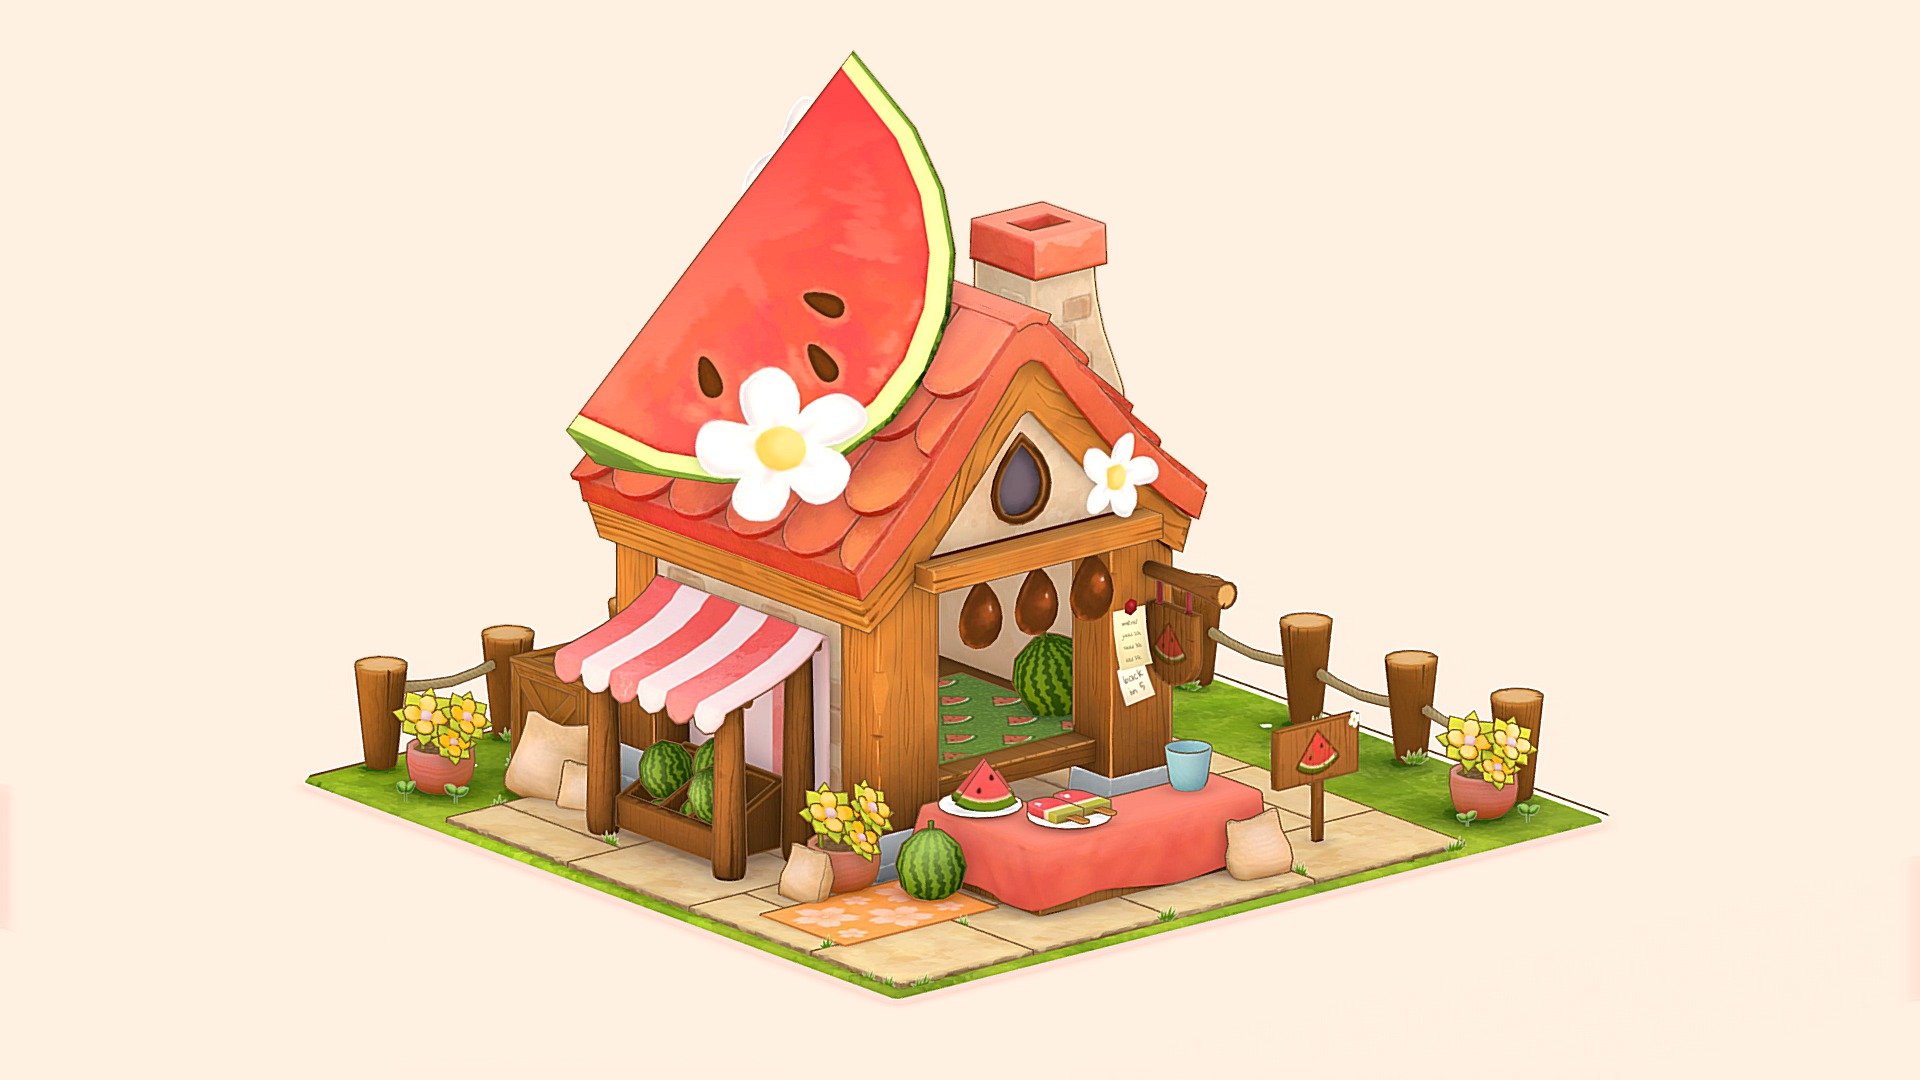 A juicy watermelon stall! My first handpainted, stylized diorama.
See more of my work here https://www.artstation.com/chelseaagno

Concept by the very talented Soyun Lee https://www.artstation.com/artwork/48Nkdk - Stylized Watermelon Stall - 3D model by Chelsea Agno (@chelsea.agno) 3d model